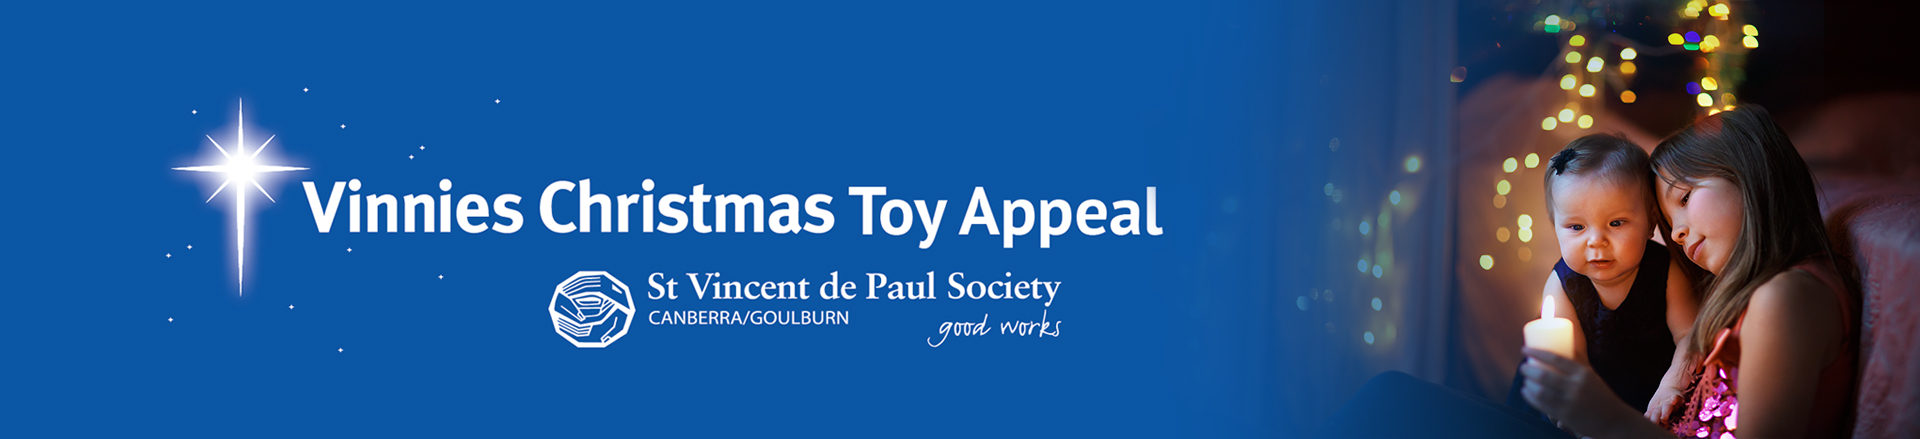 Vinnies Christmas Gift Appeal - ACT - Canberra/Goulburn